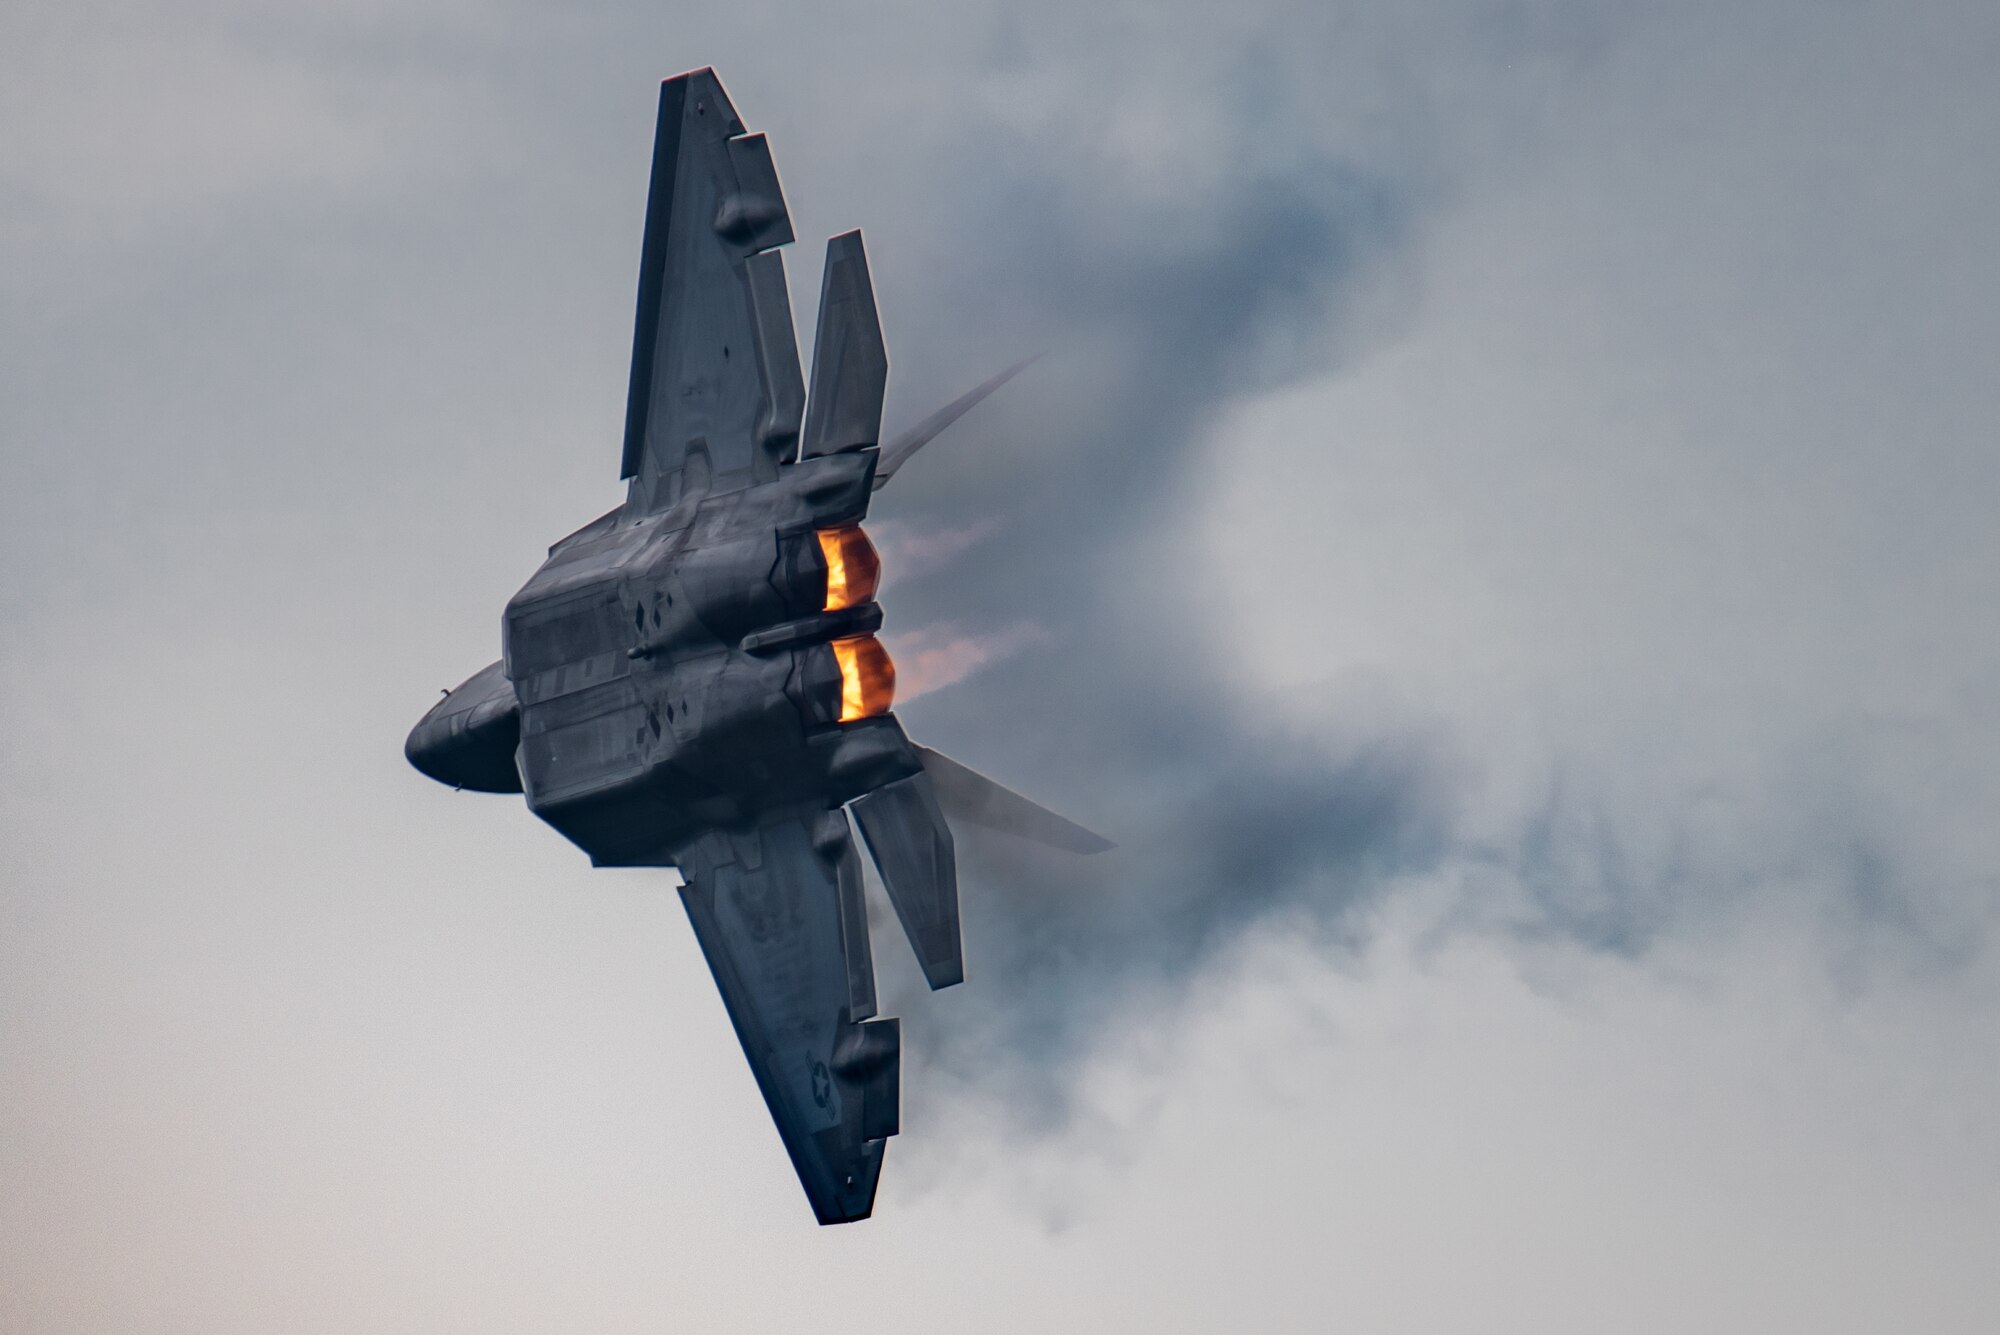 U.S. Air Force Maj. Paul Lopez, F-22 Demo Team commander, performs the stiff-pitch maneuver during the Spirit of St. Louis Air Show Sept. 7-8, 2019.  Founded in 2007, the F-22 Raptor Demo Team showcases the unique capabilities of the world's premier 5th-generation fighter aircraft. (U.S. Air Force photo by 2nd Lt. Sam Eckholm)